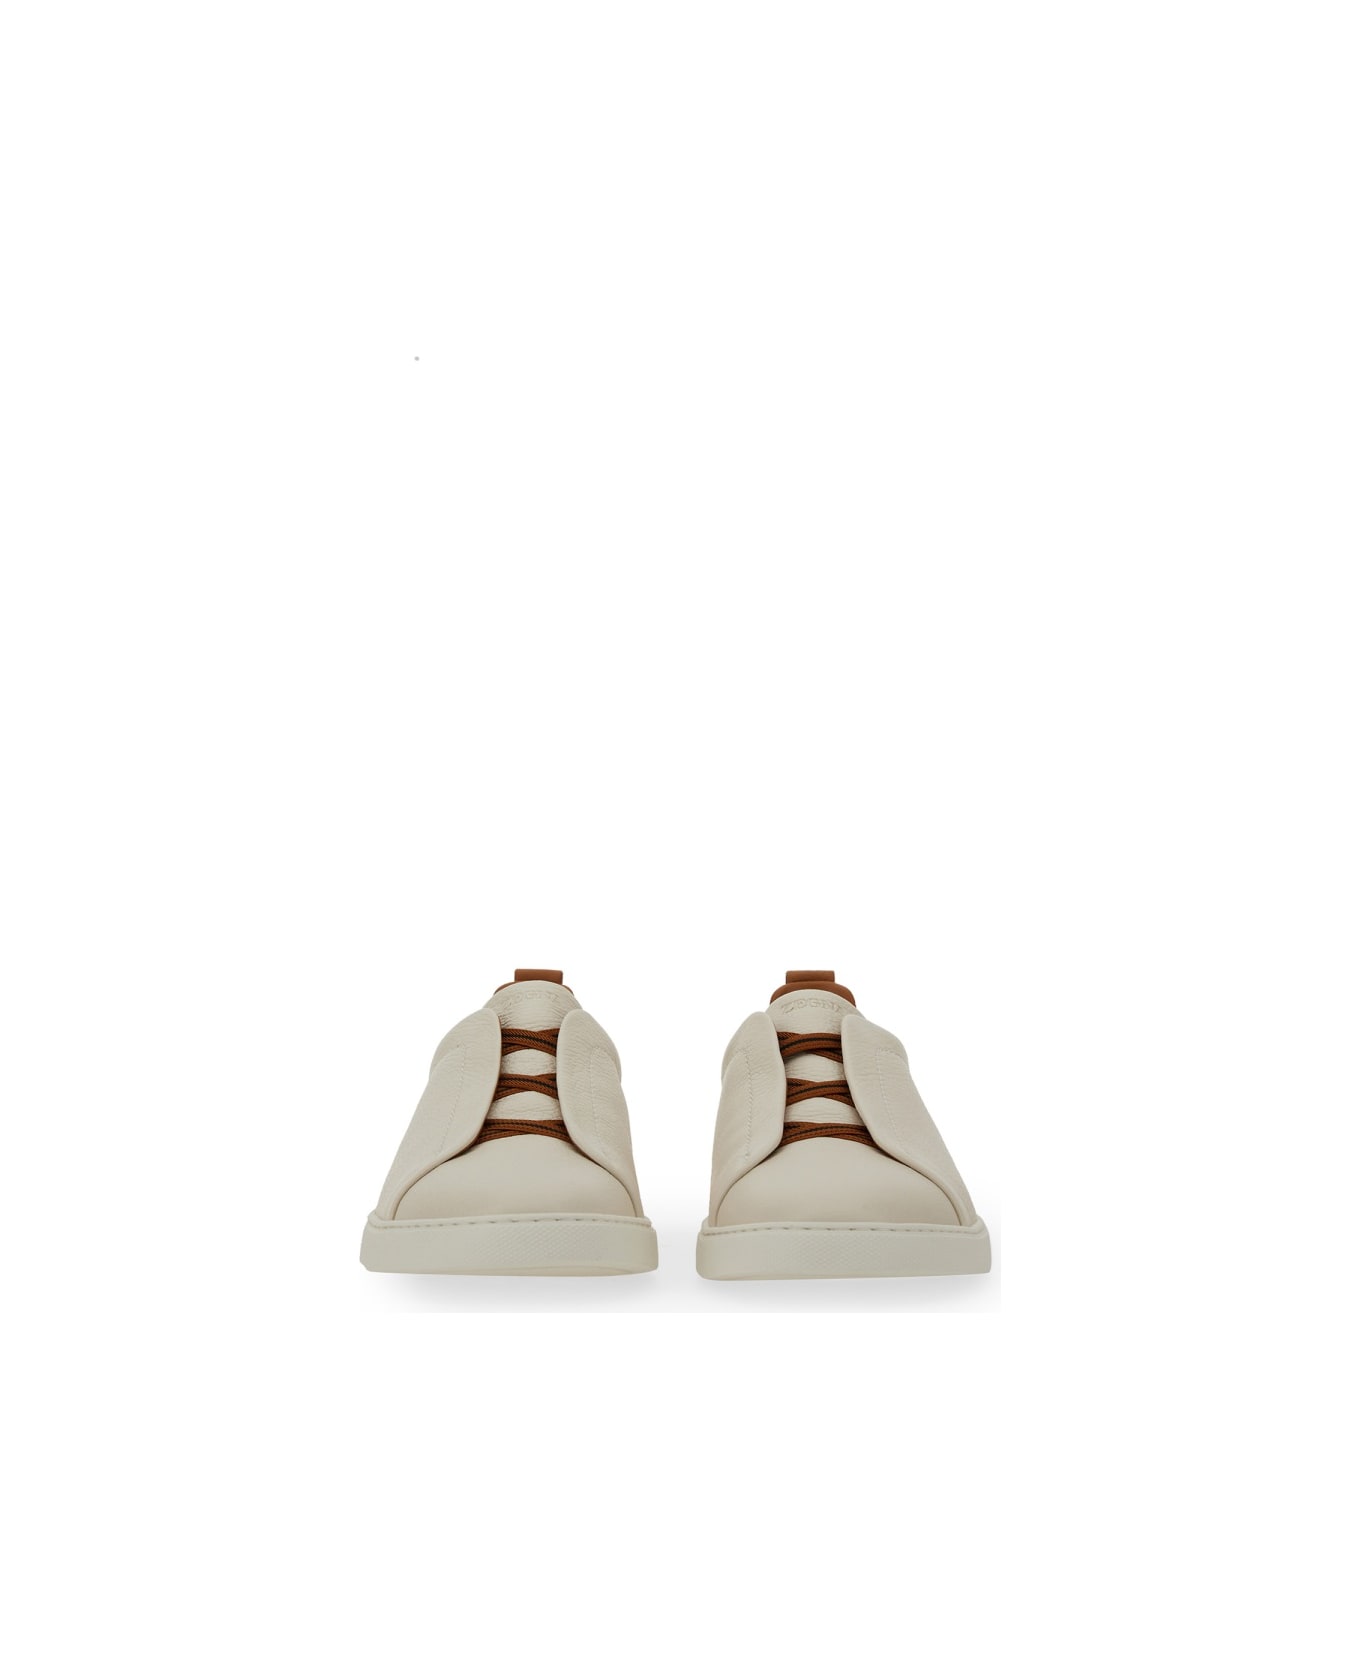 Zegna Low Top Sneaker With Triple Stitch - BEIGE